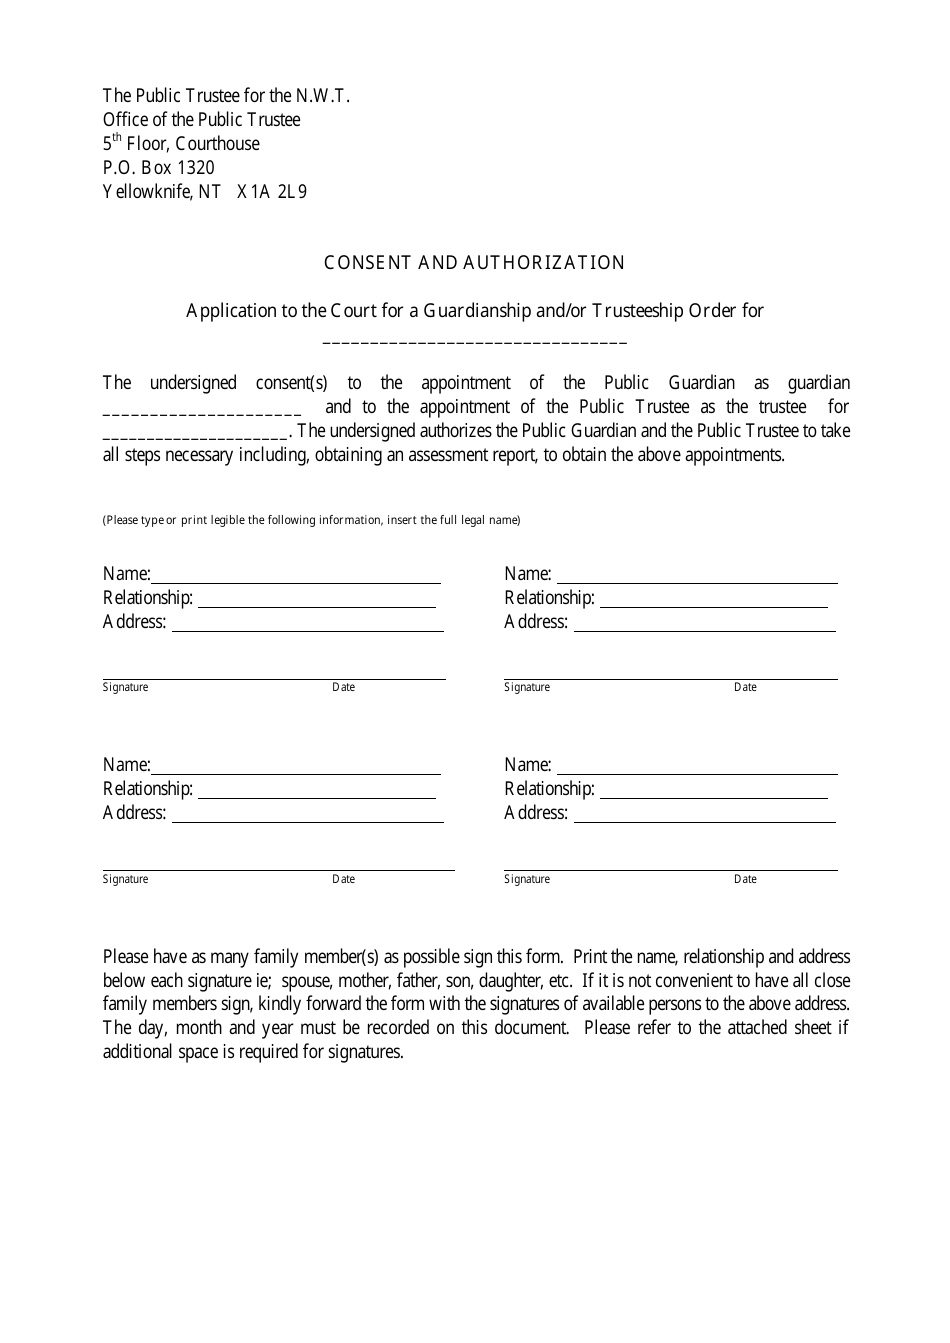 Consent and Authorization Application to the Court for a Guardianship and / or Trusteeship Order - Northwest Territories, Canada, Page 1